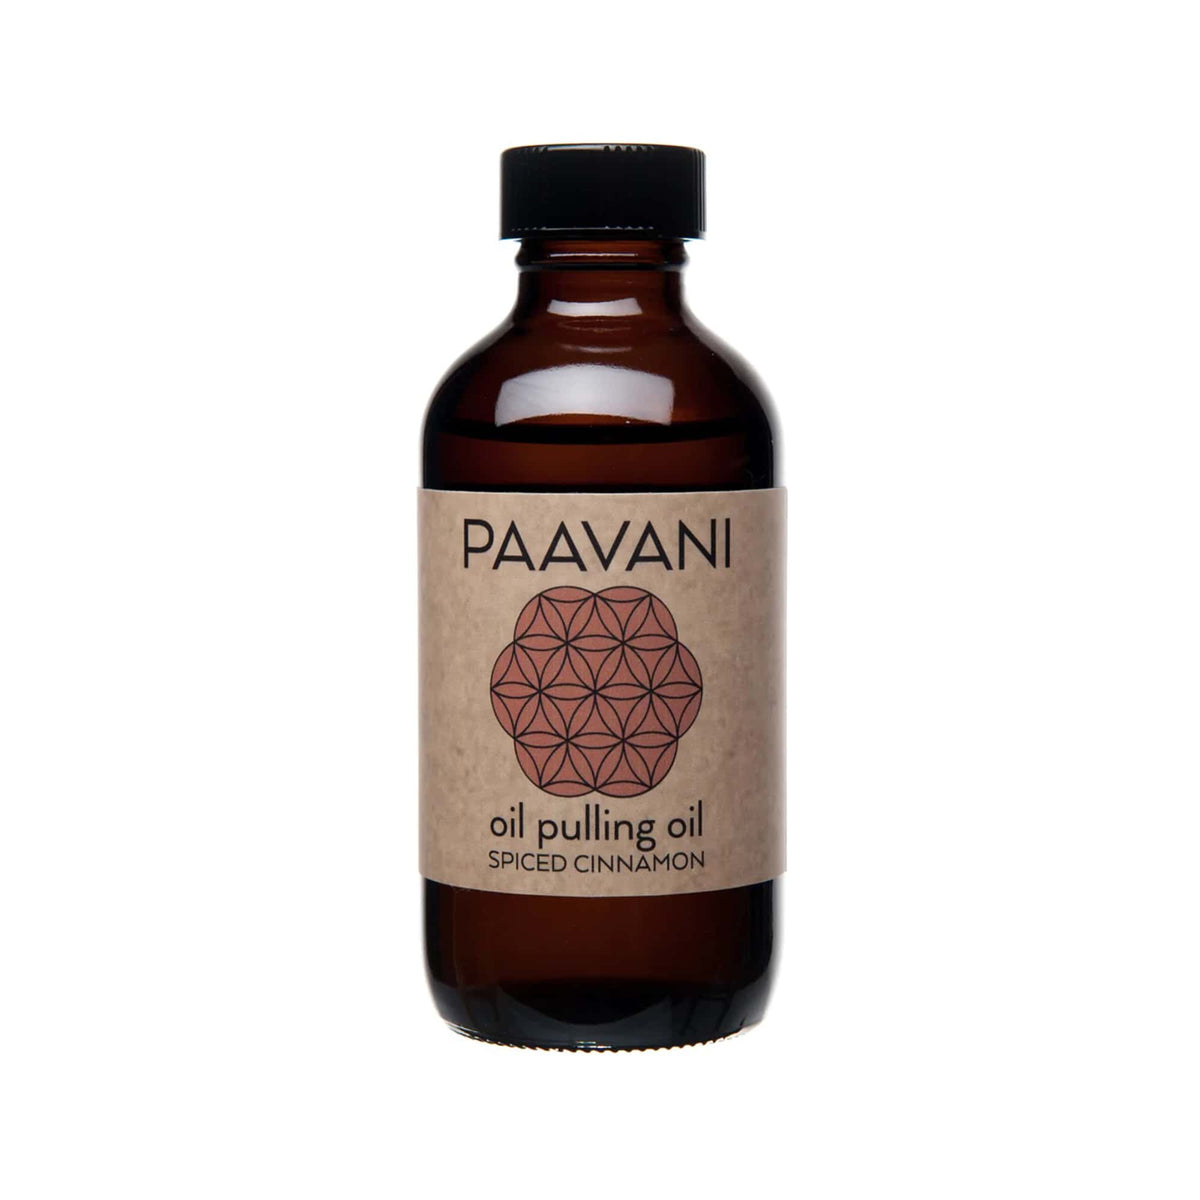 Paavani Ayurveda - The Oral Care Ritual - Cinnamon including Pulling Oil, Copper Tongue Cleaner and Cloth Travel Pouch, Oral Health and Hygiene, Ayurvedic Oil Pulling and Tongue Cleaning, Bundle